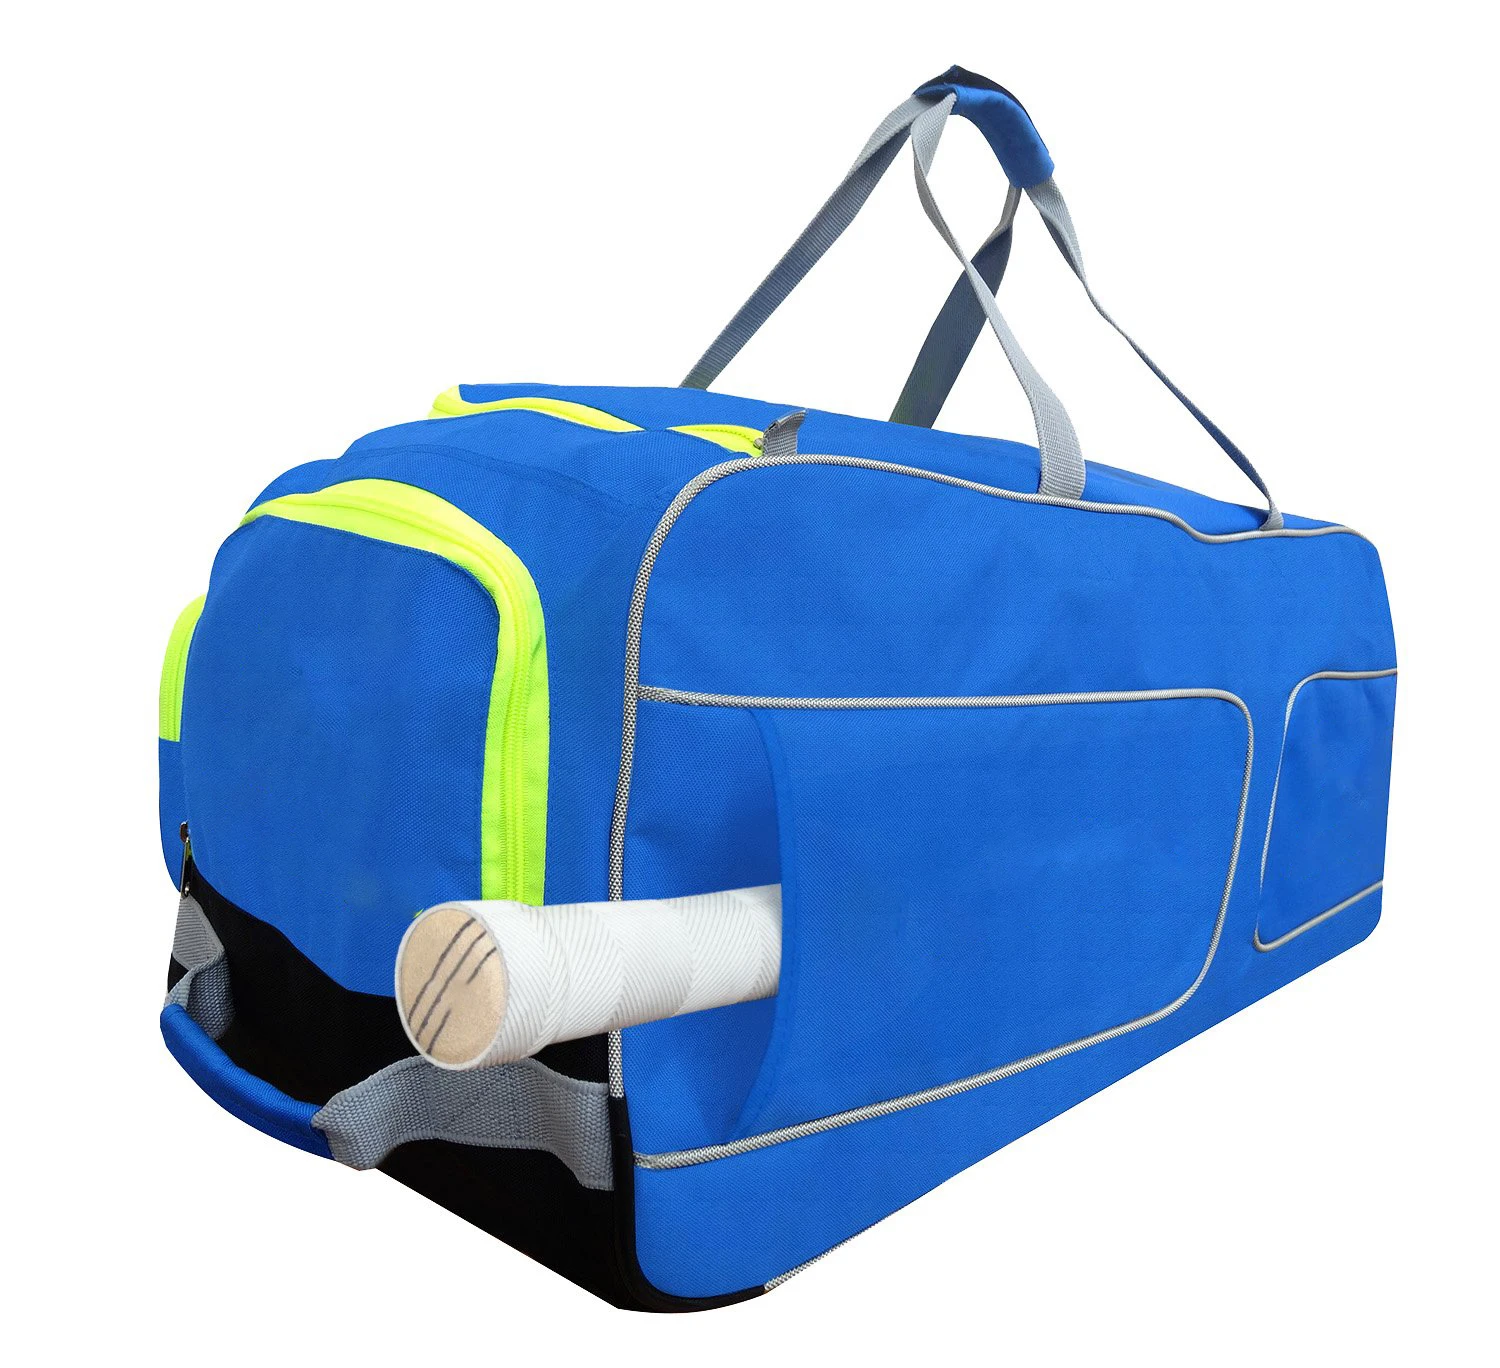 Private Label Newest Stylish Heavy Duty Sports Kit Waterproof Cricket Kit Bag With Custom Size by Canleo International